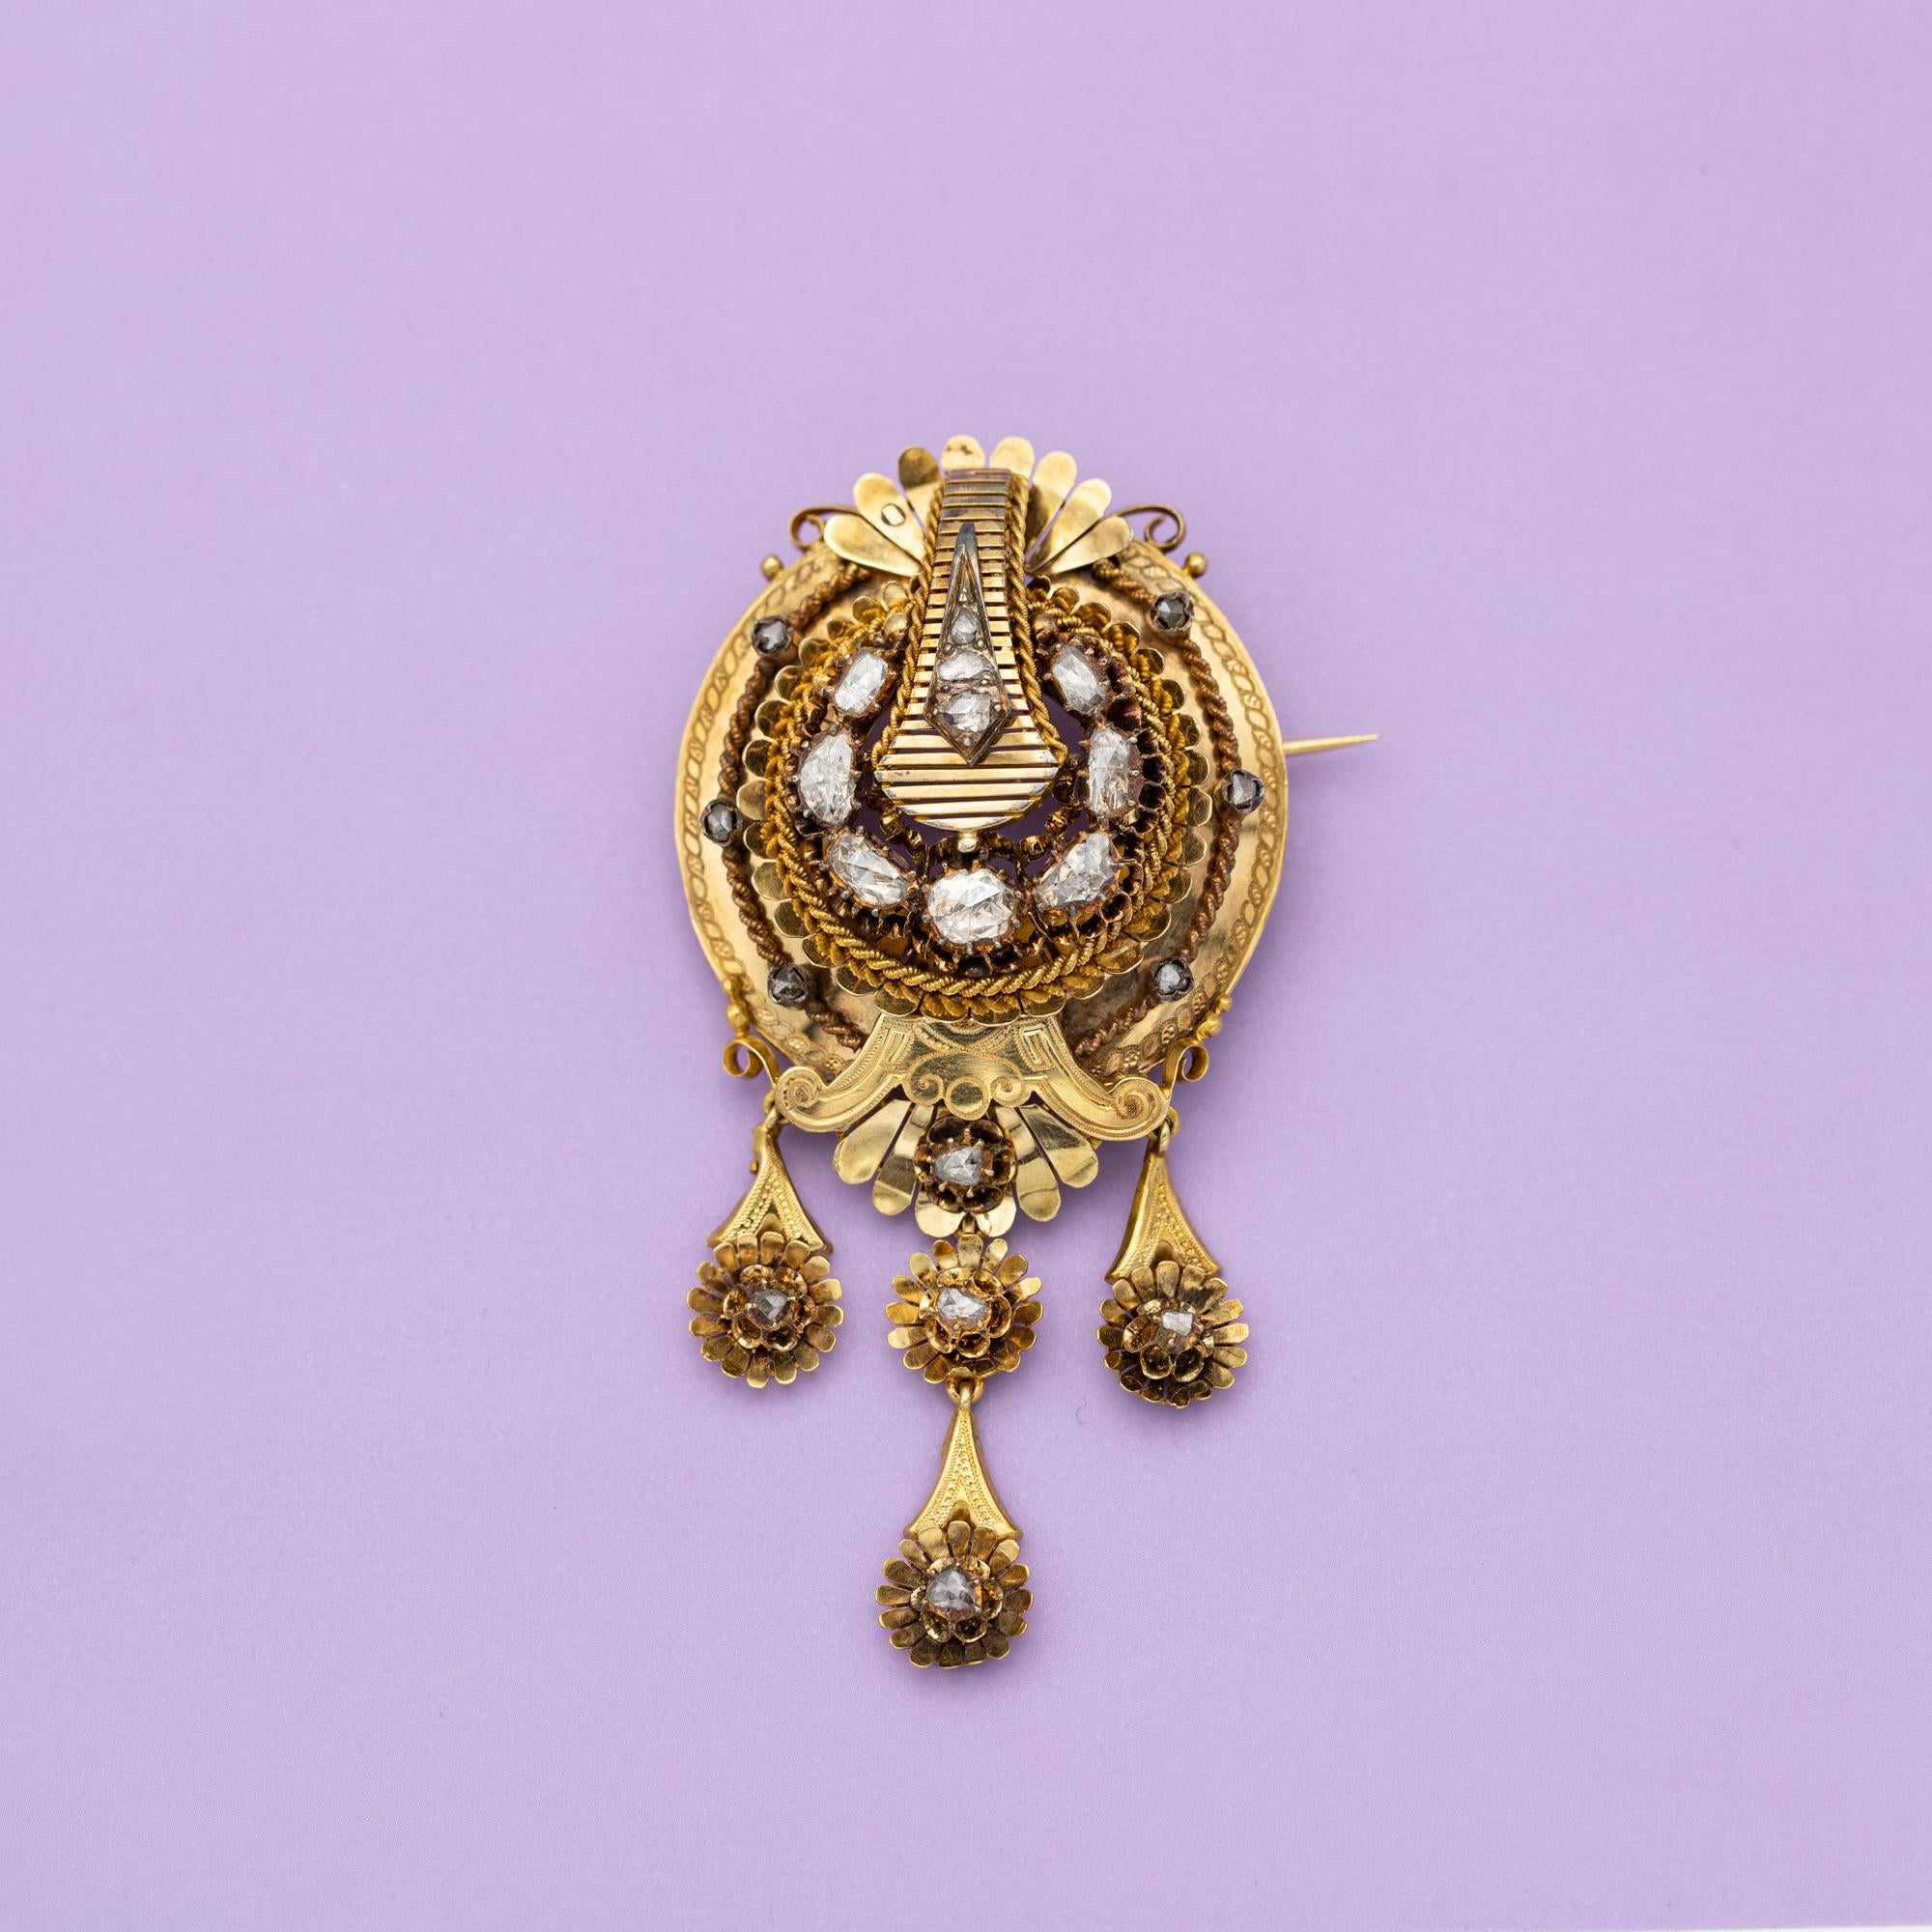 18ct yellow gold Victorian brooch - Large and heavy foiled back diamond heirloom For Sale 11